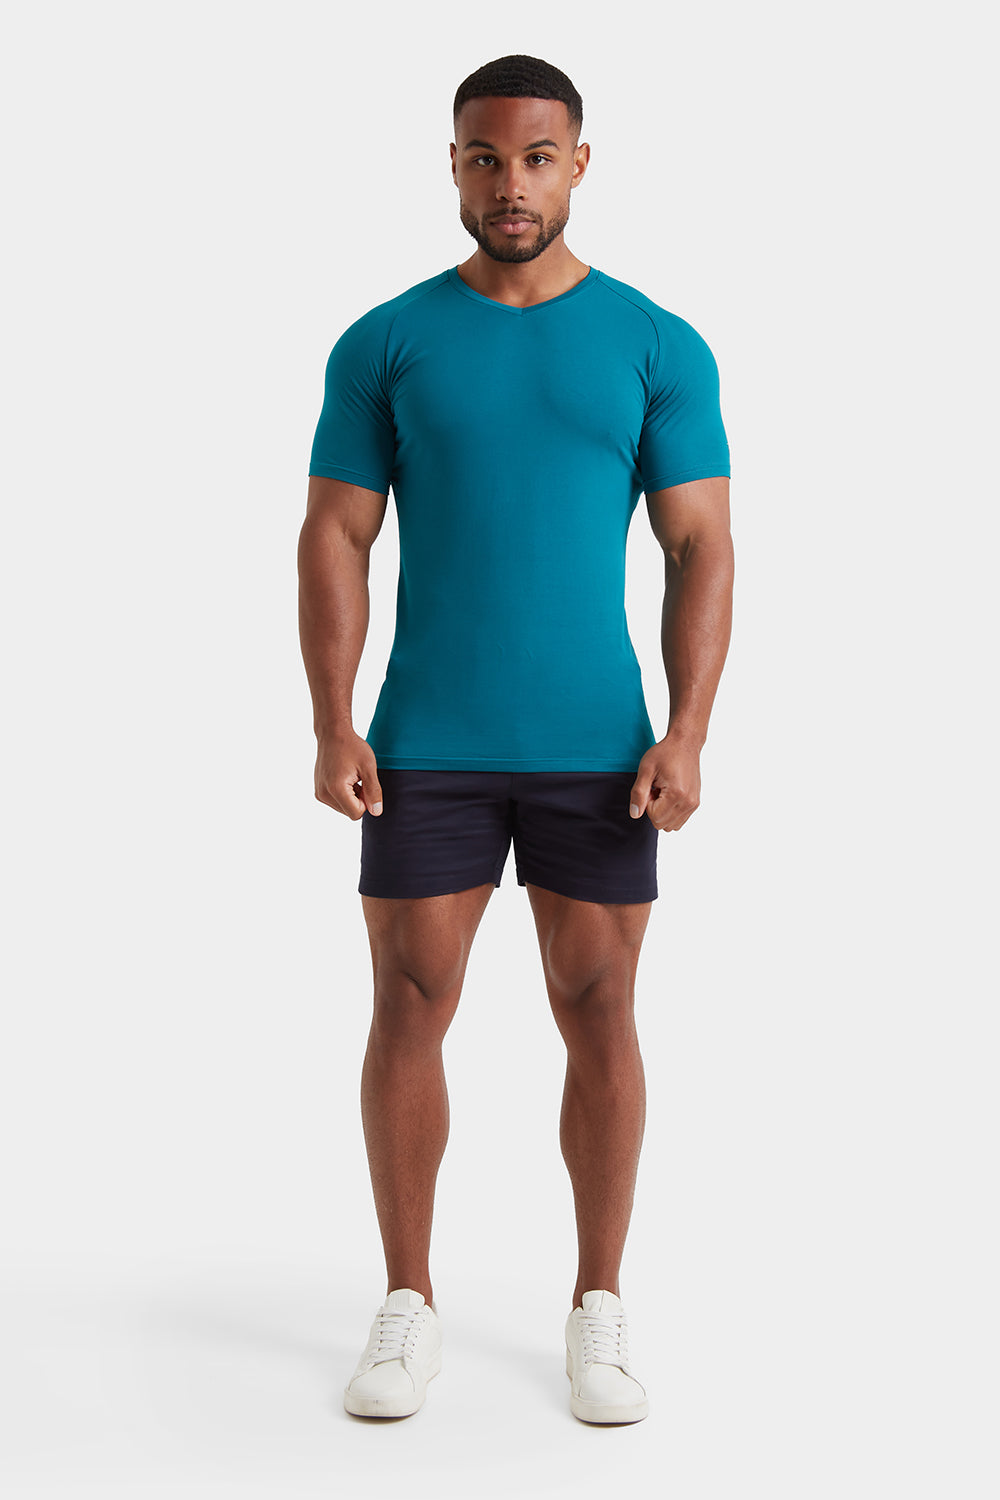 Premium Muscle Fit V-Neck in Peacock - TAILORED ATHLETE - ROW